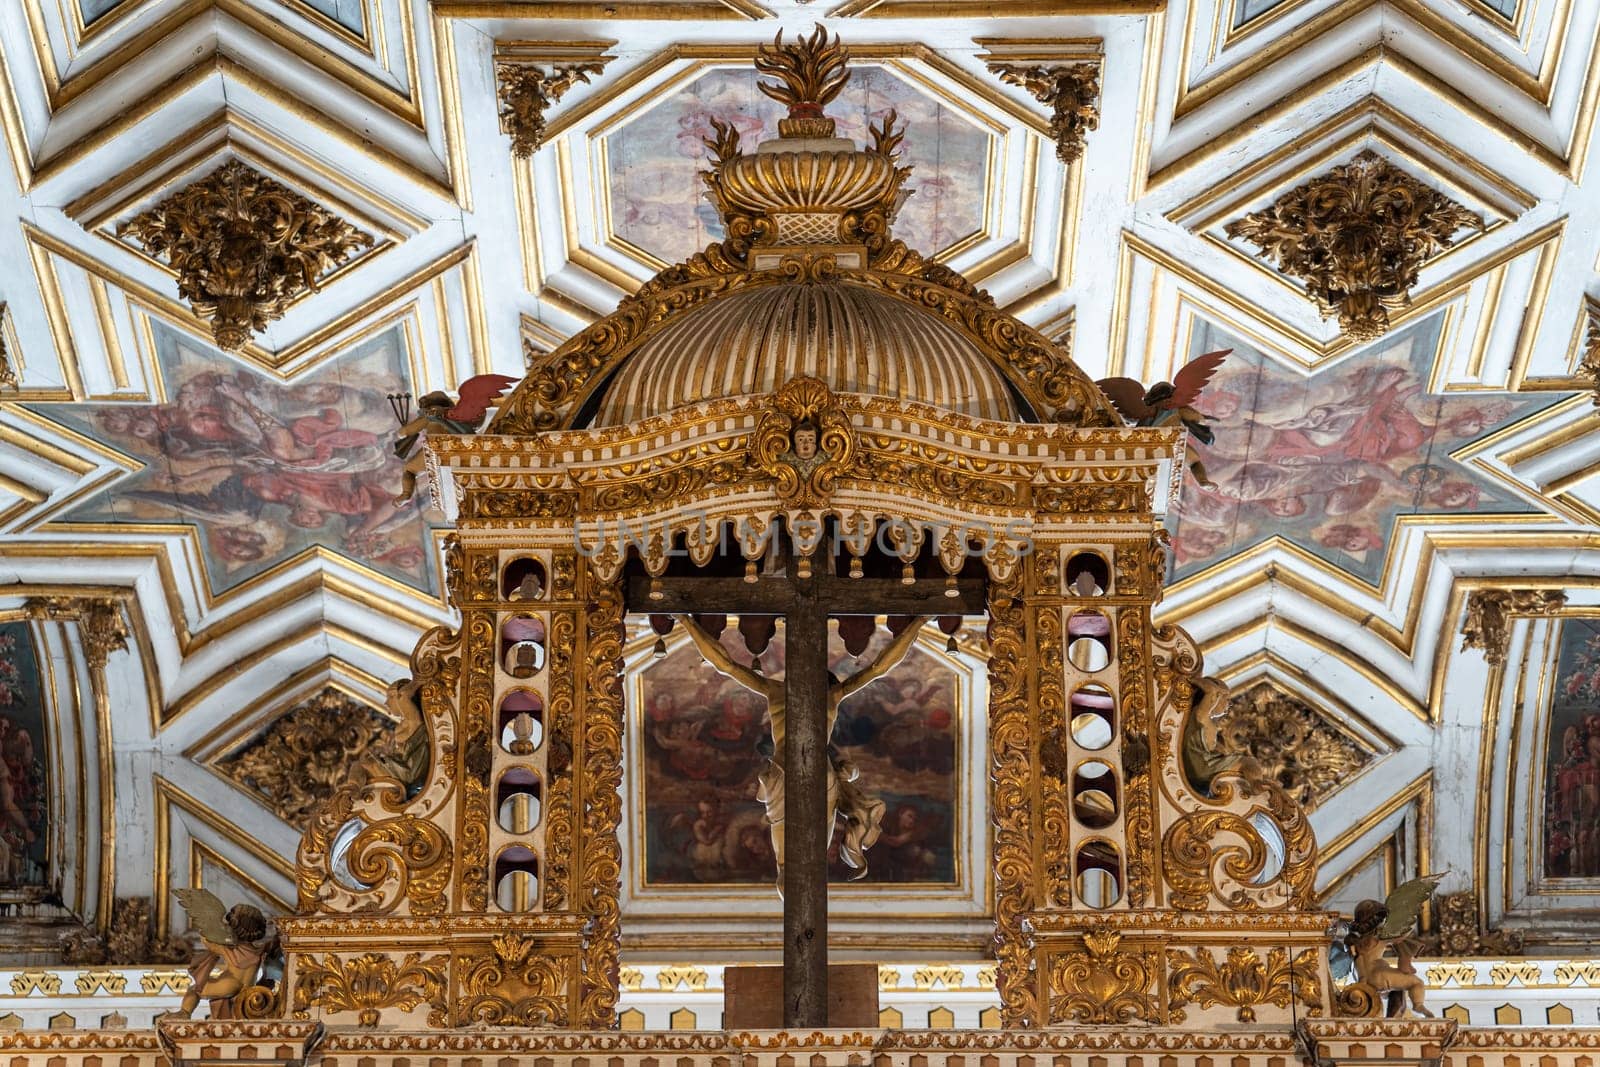 Ornate gold altarpiece with angel statues against a frescoed ceiling.